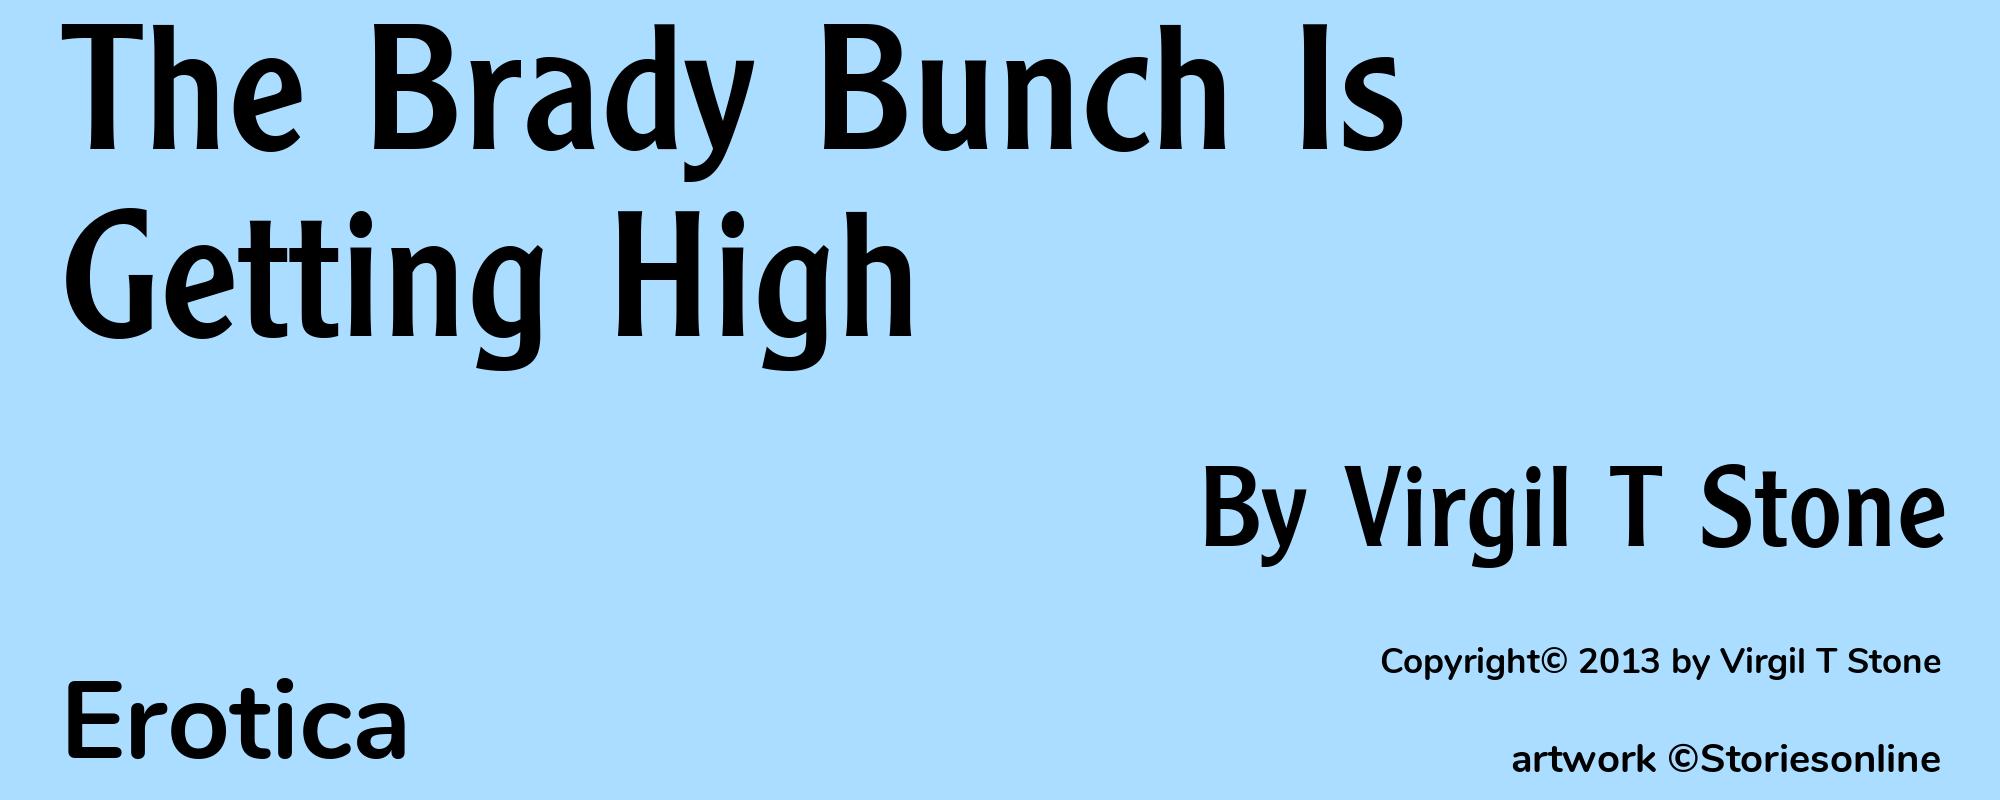 The Brady Bunch Is Getting High - Cover